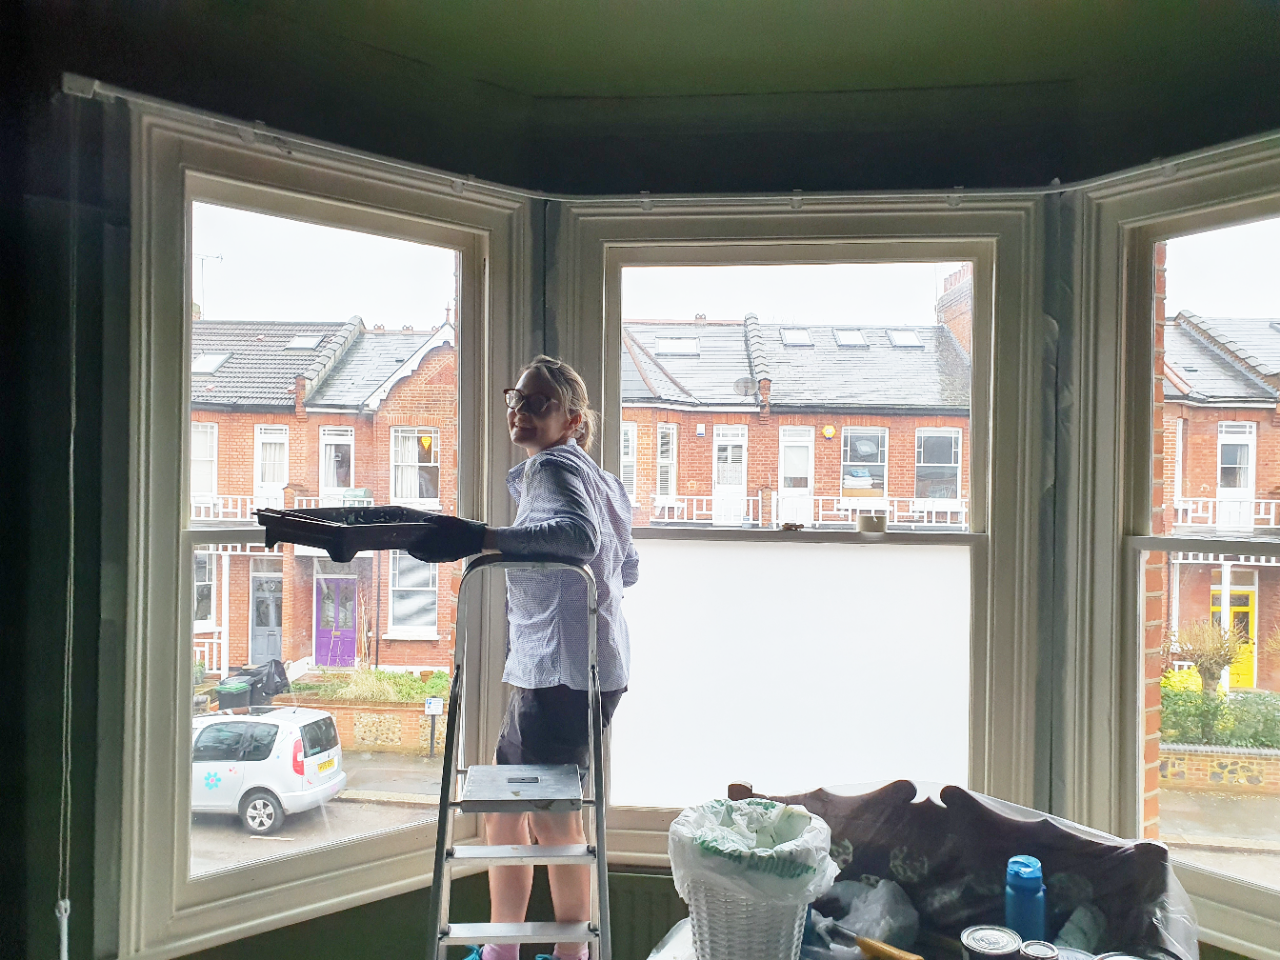 A photo of one of the clients decorating.